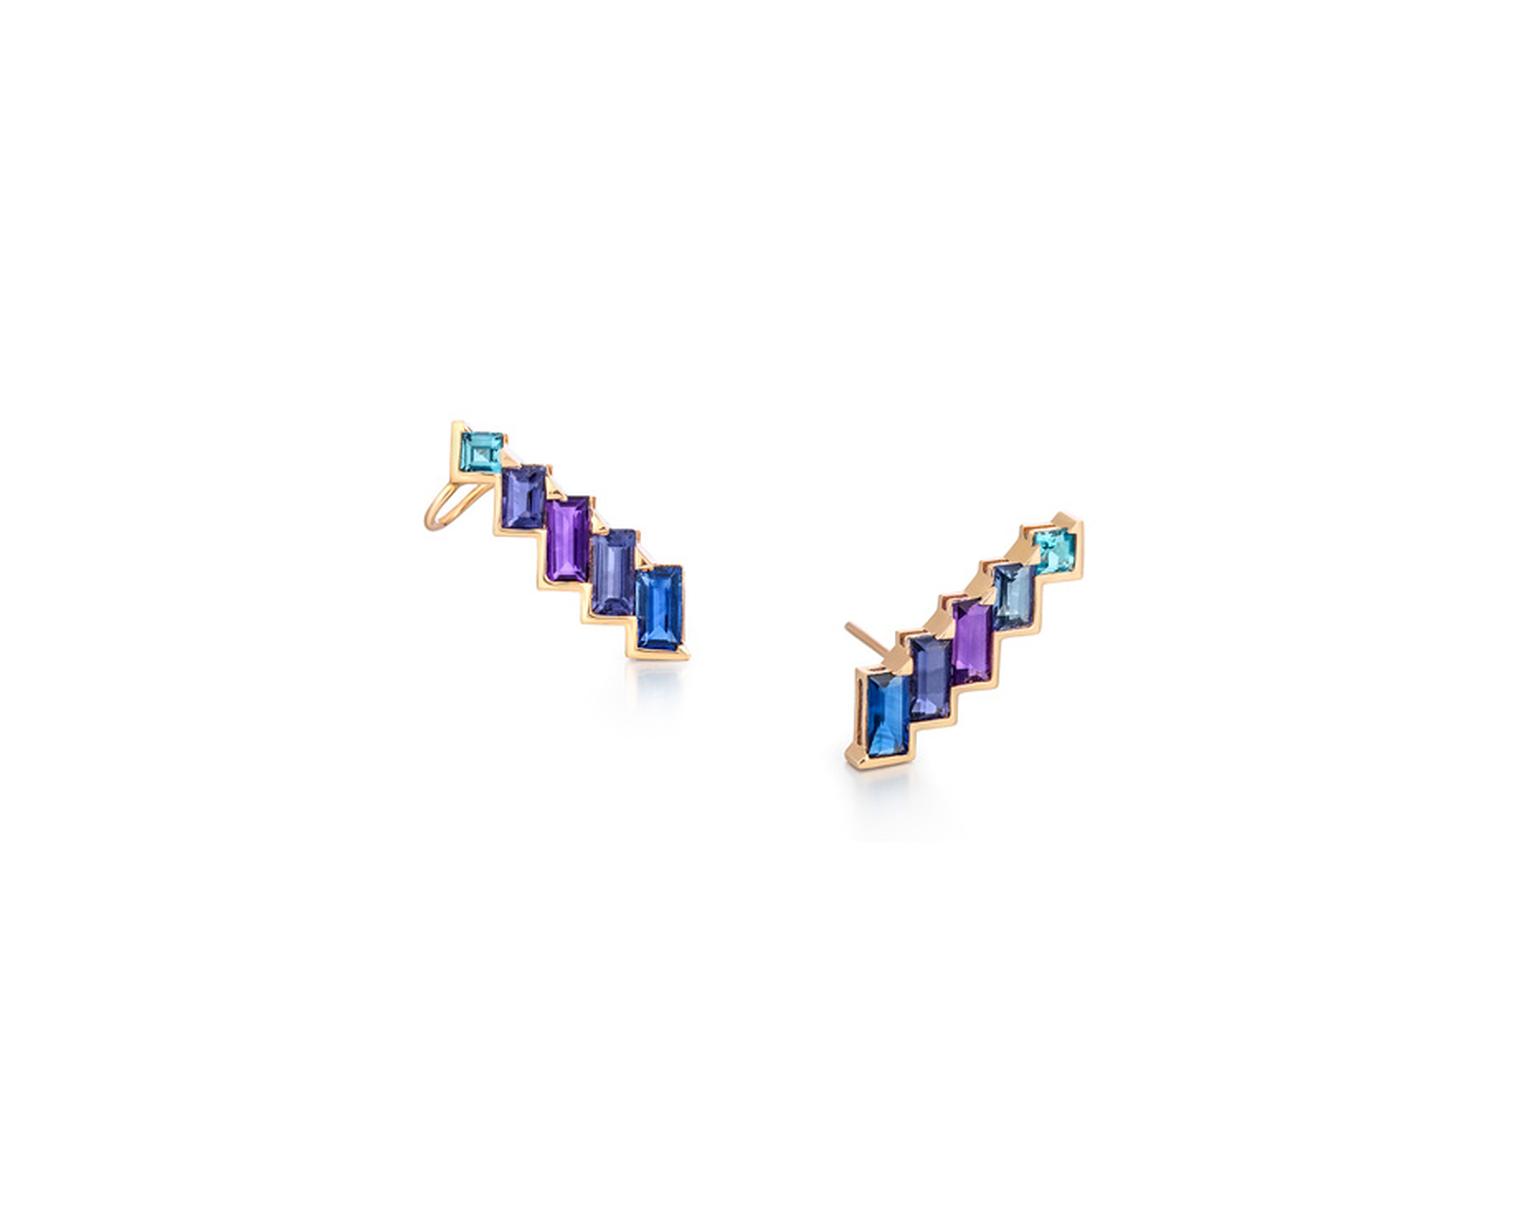 Earring cuffs from Tomasz Donocik's Electric Night collection.